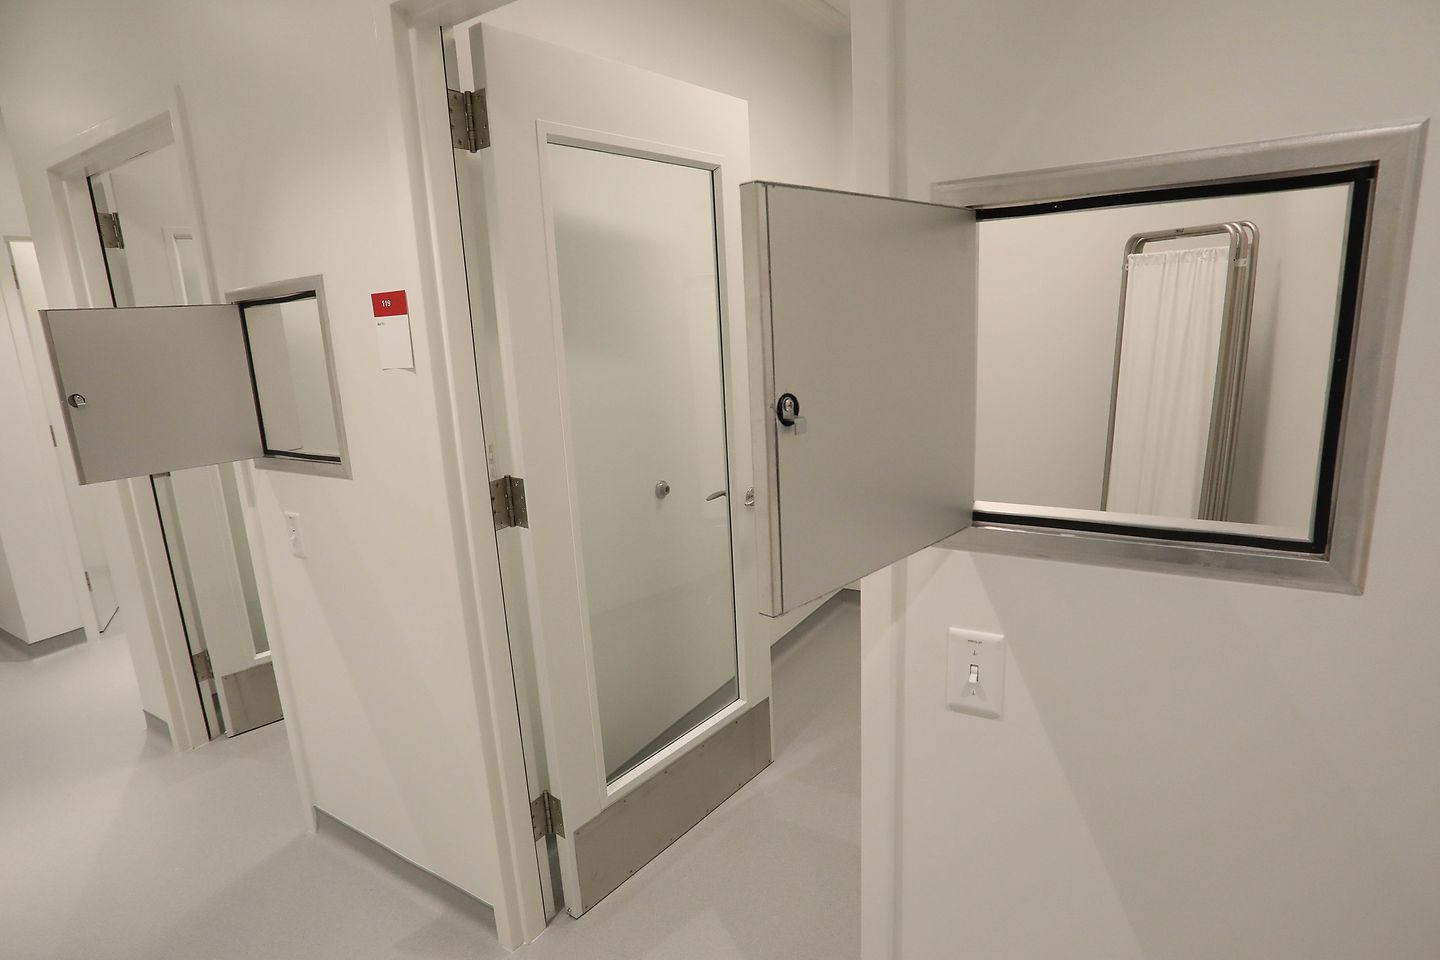 Rooms designed specifically for scent testing and evaluation by consumers at Henkel’s new R&D facility in Trumbull, Conn. A full building renovation occurred to create added office and lab space.